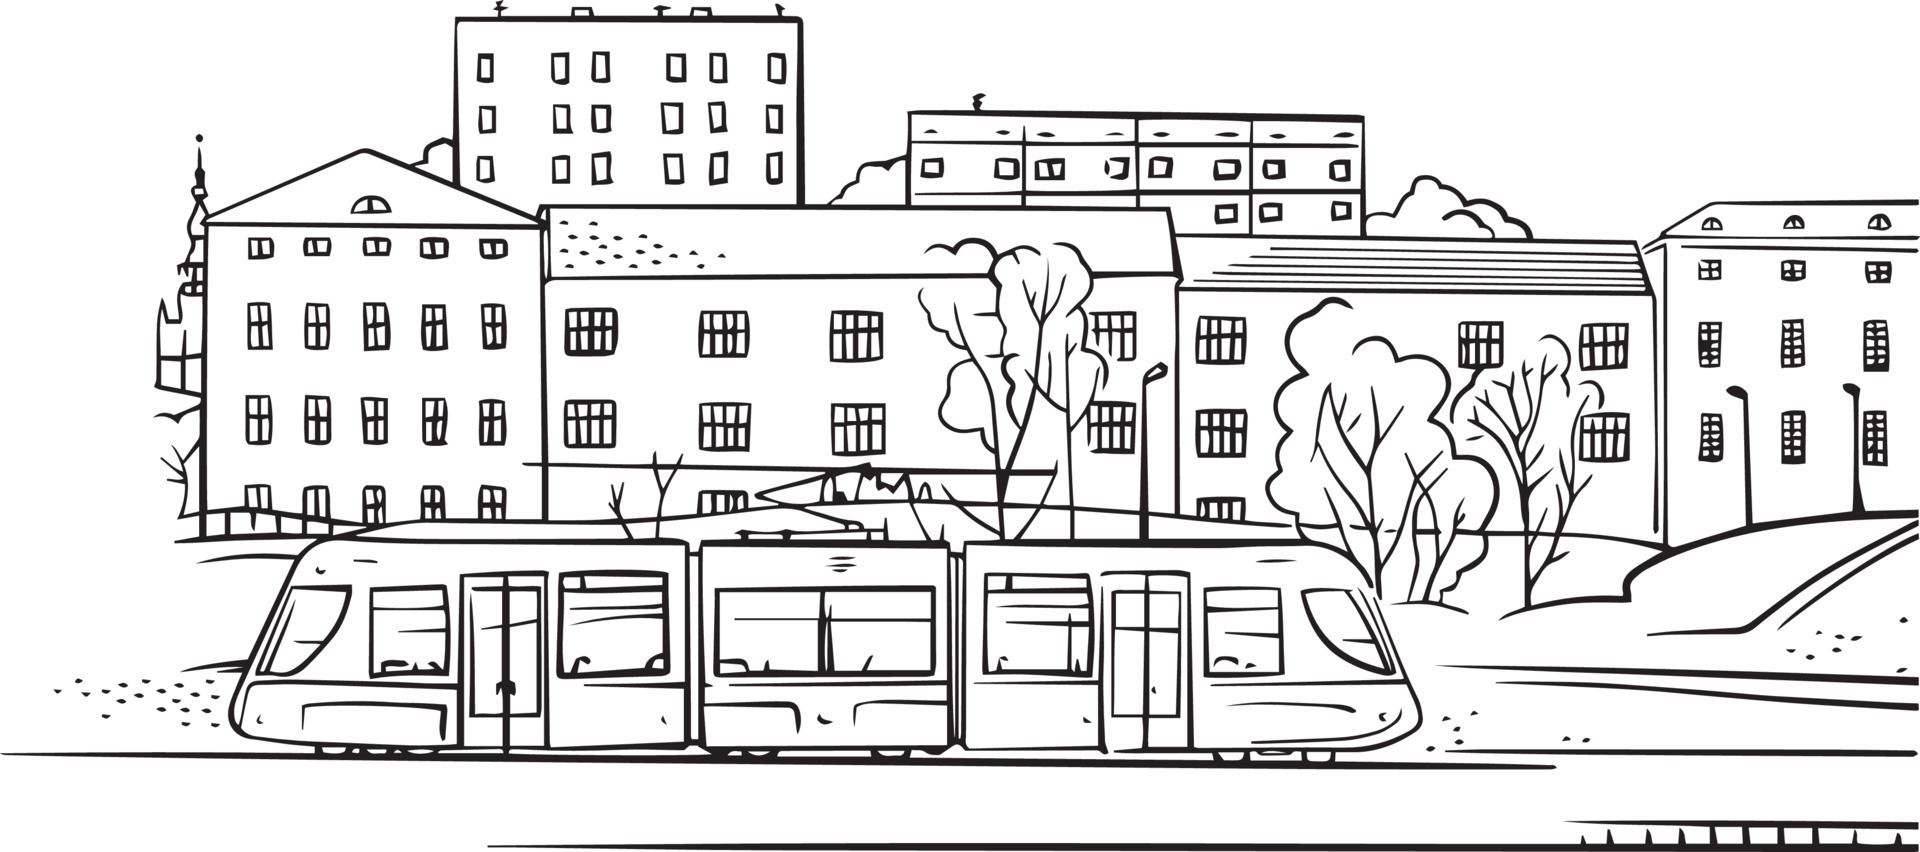 Sketch city street Black and white sketch city street with street view  cars and buildings vector illustration  CanStock